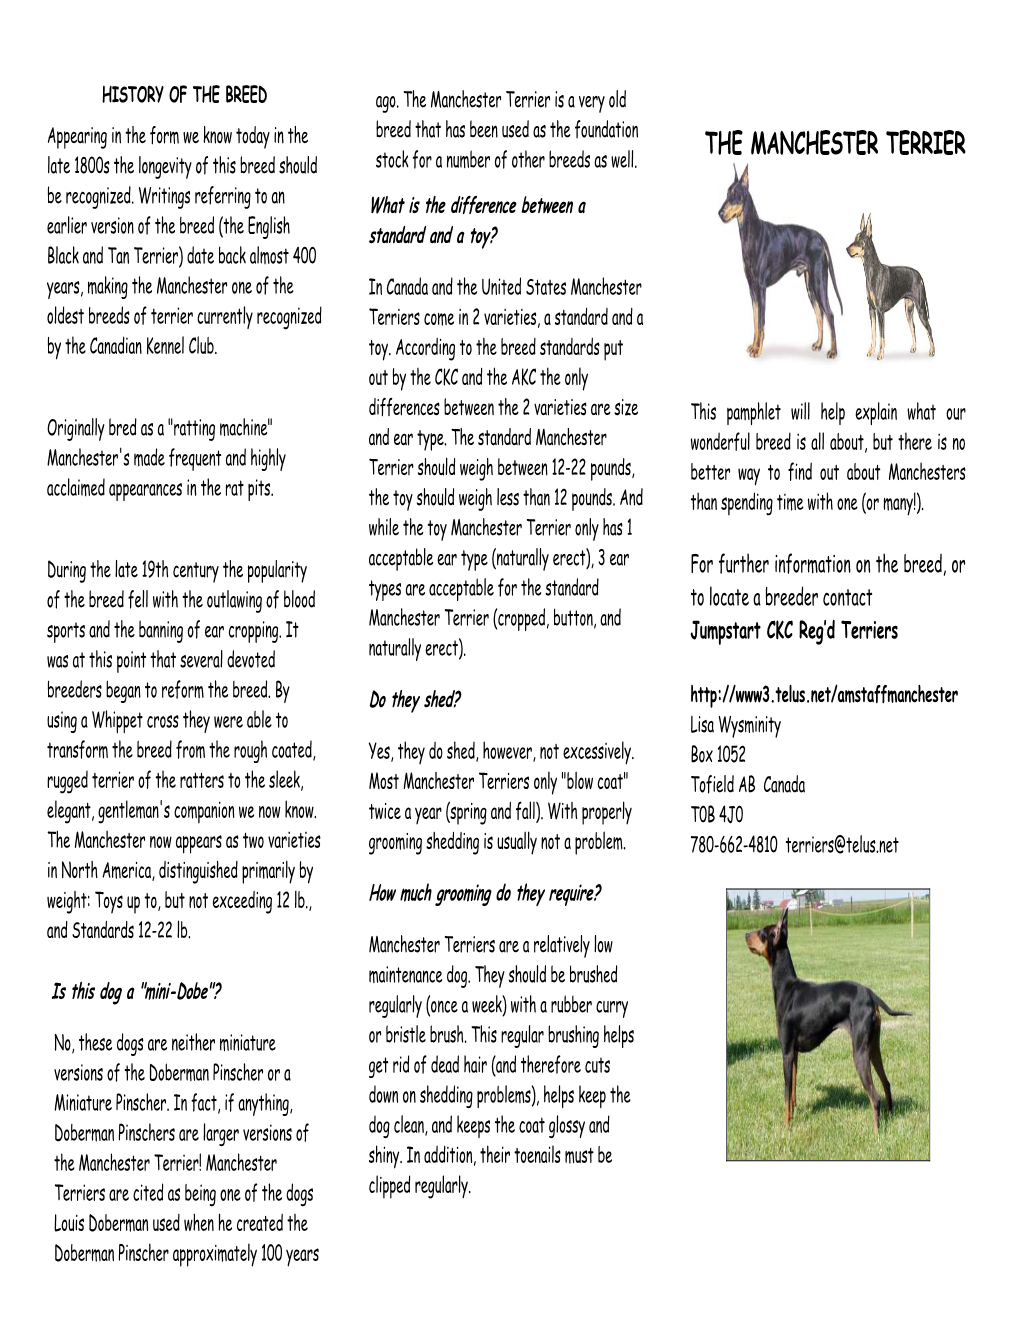 The Manchester Terrier